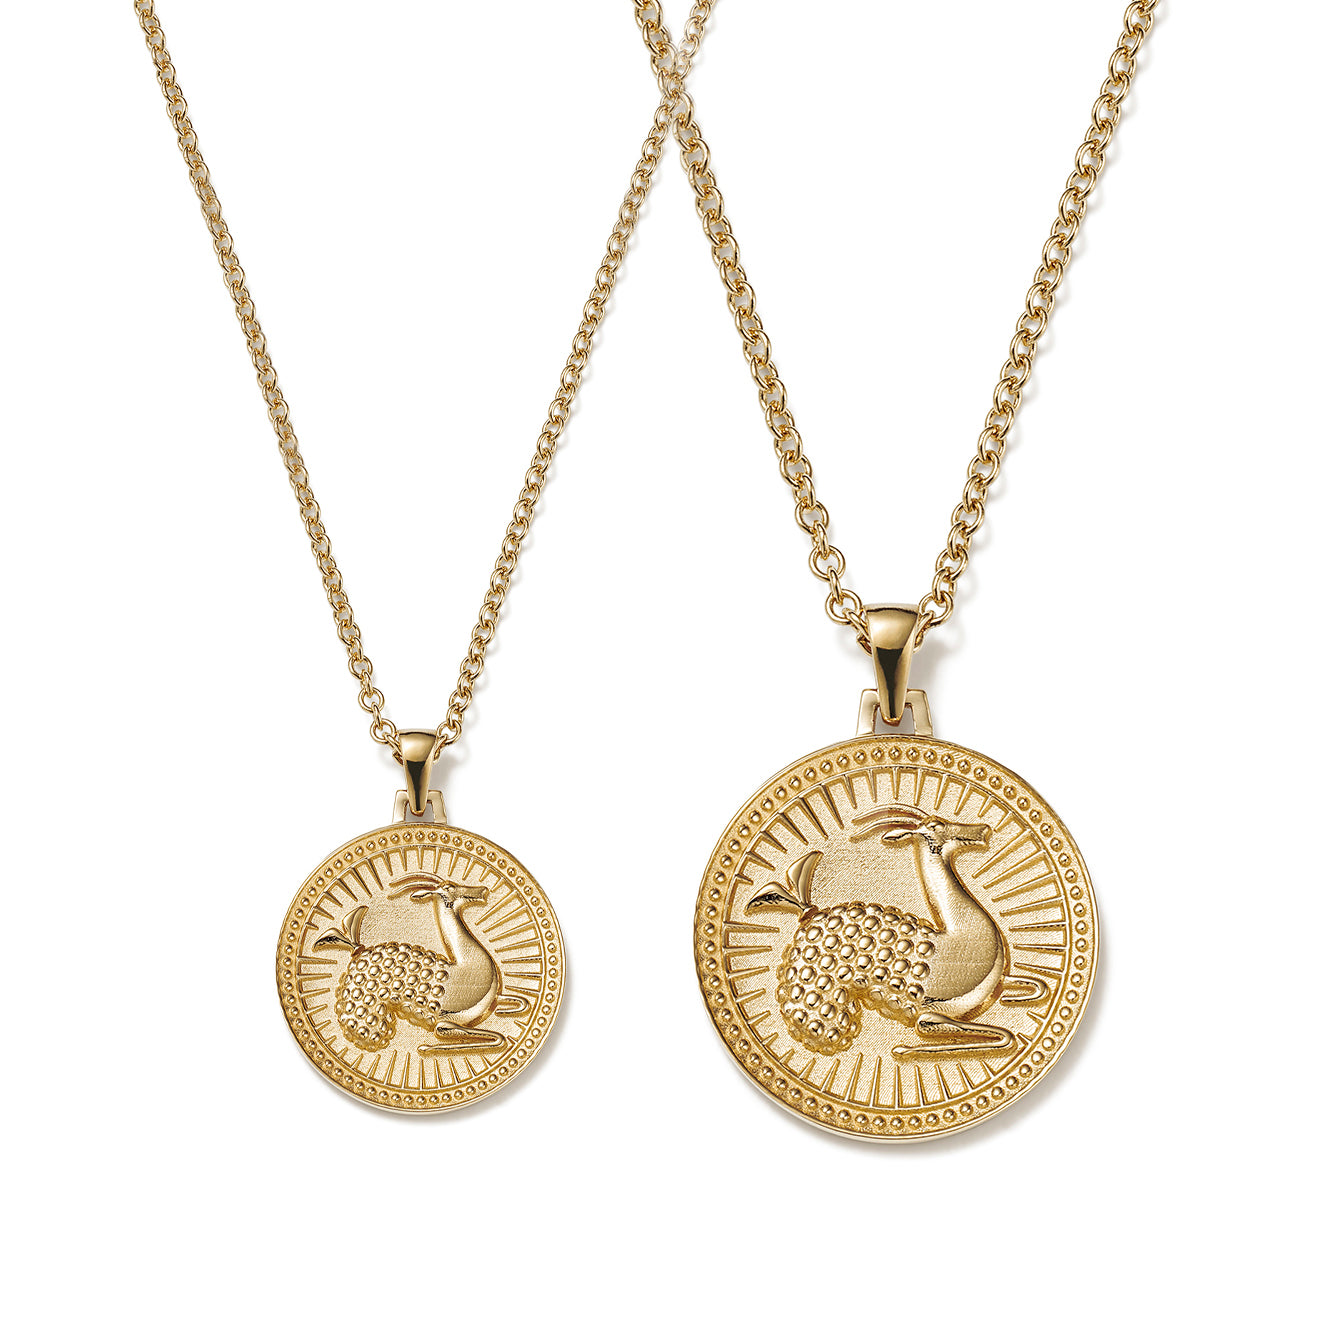 Small and Large Ethical Gold Capricorn Pendant Necklaces Side By Side on a White Background